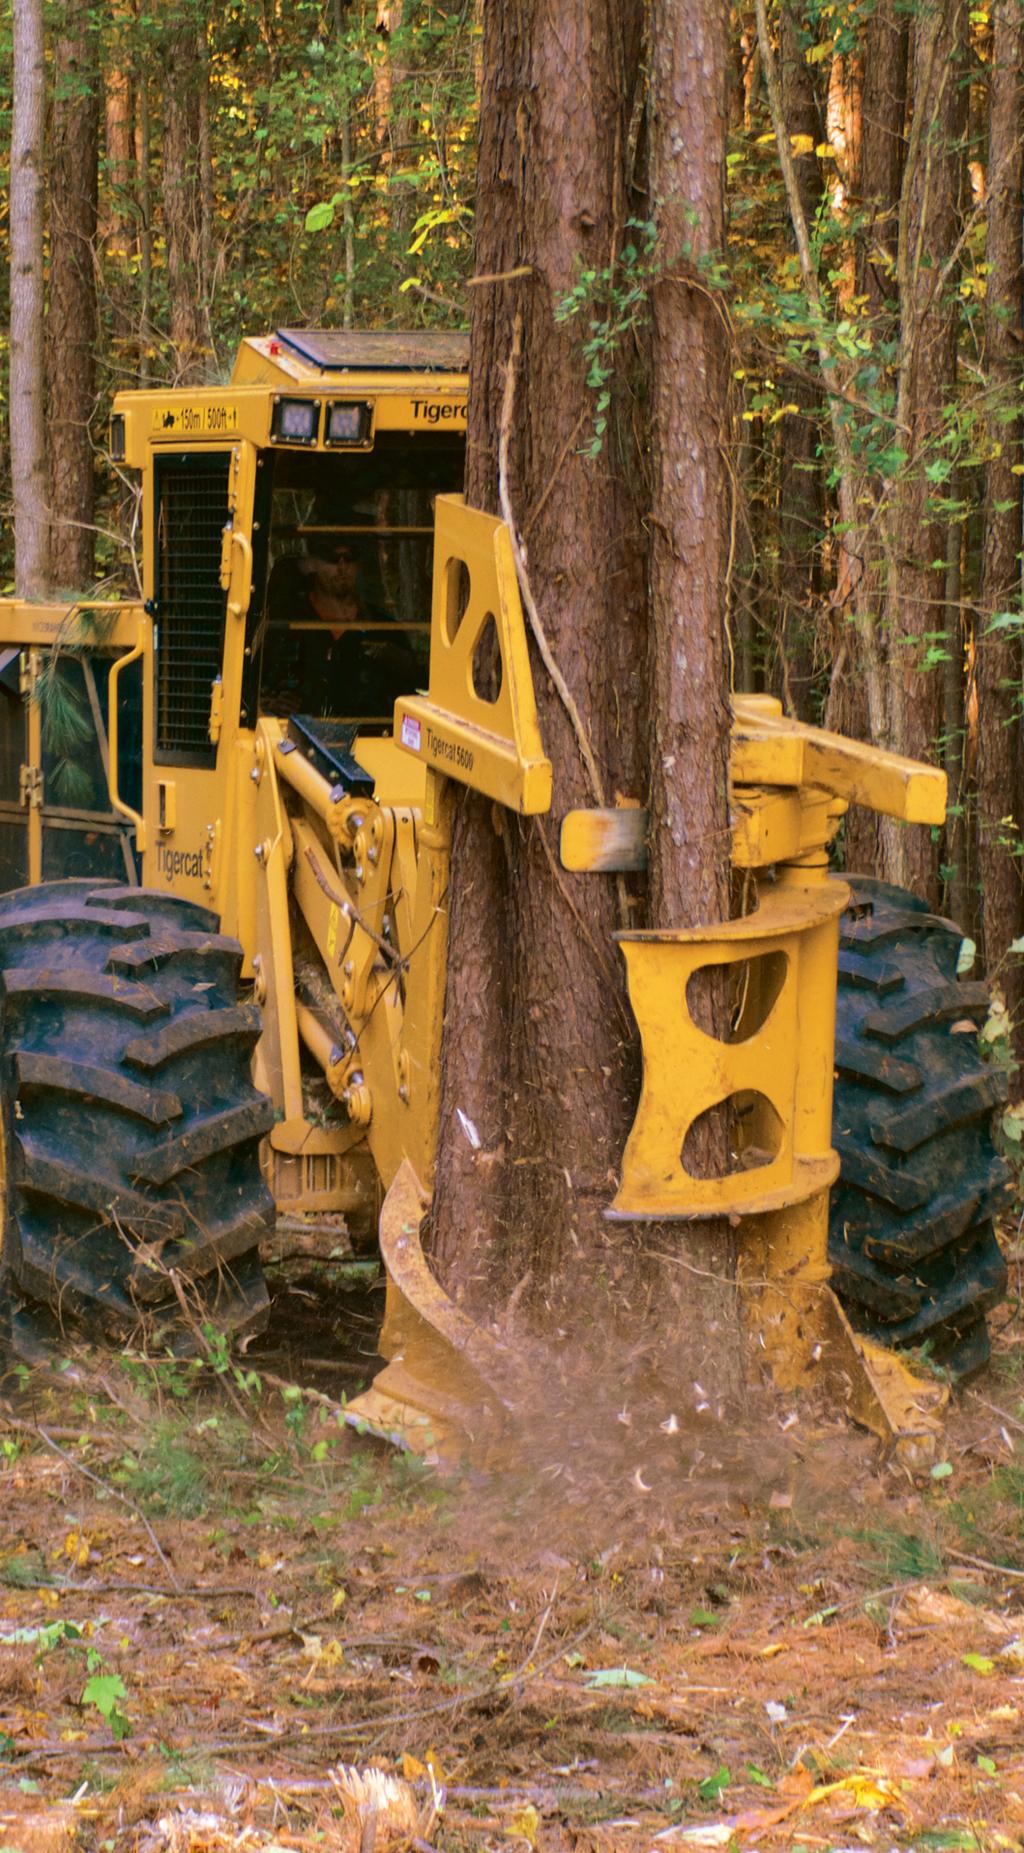 Choosing the right Tigercat felling head can reduce cost and boost the productivity of the